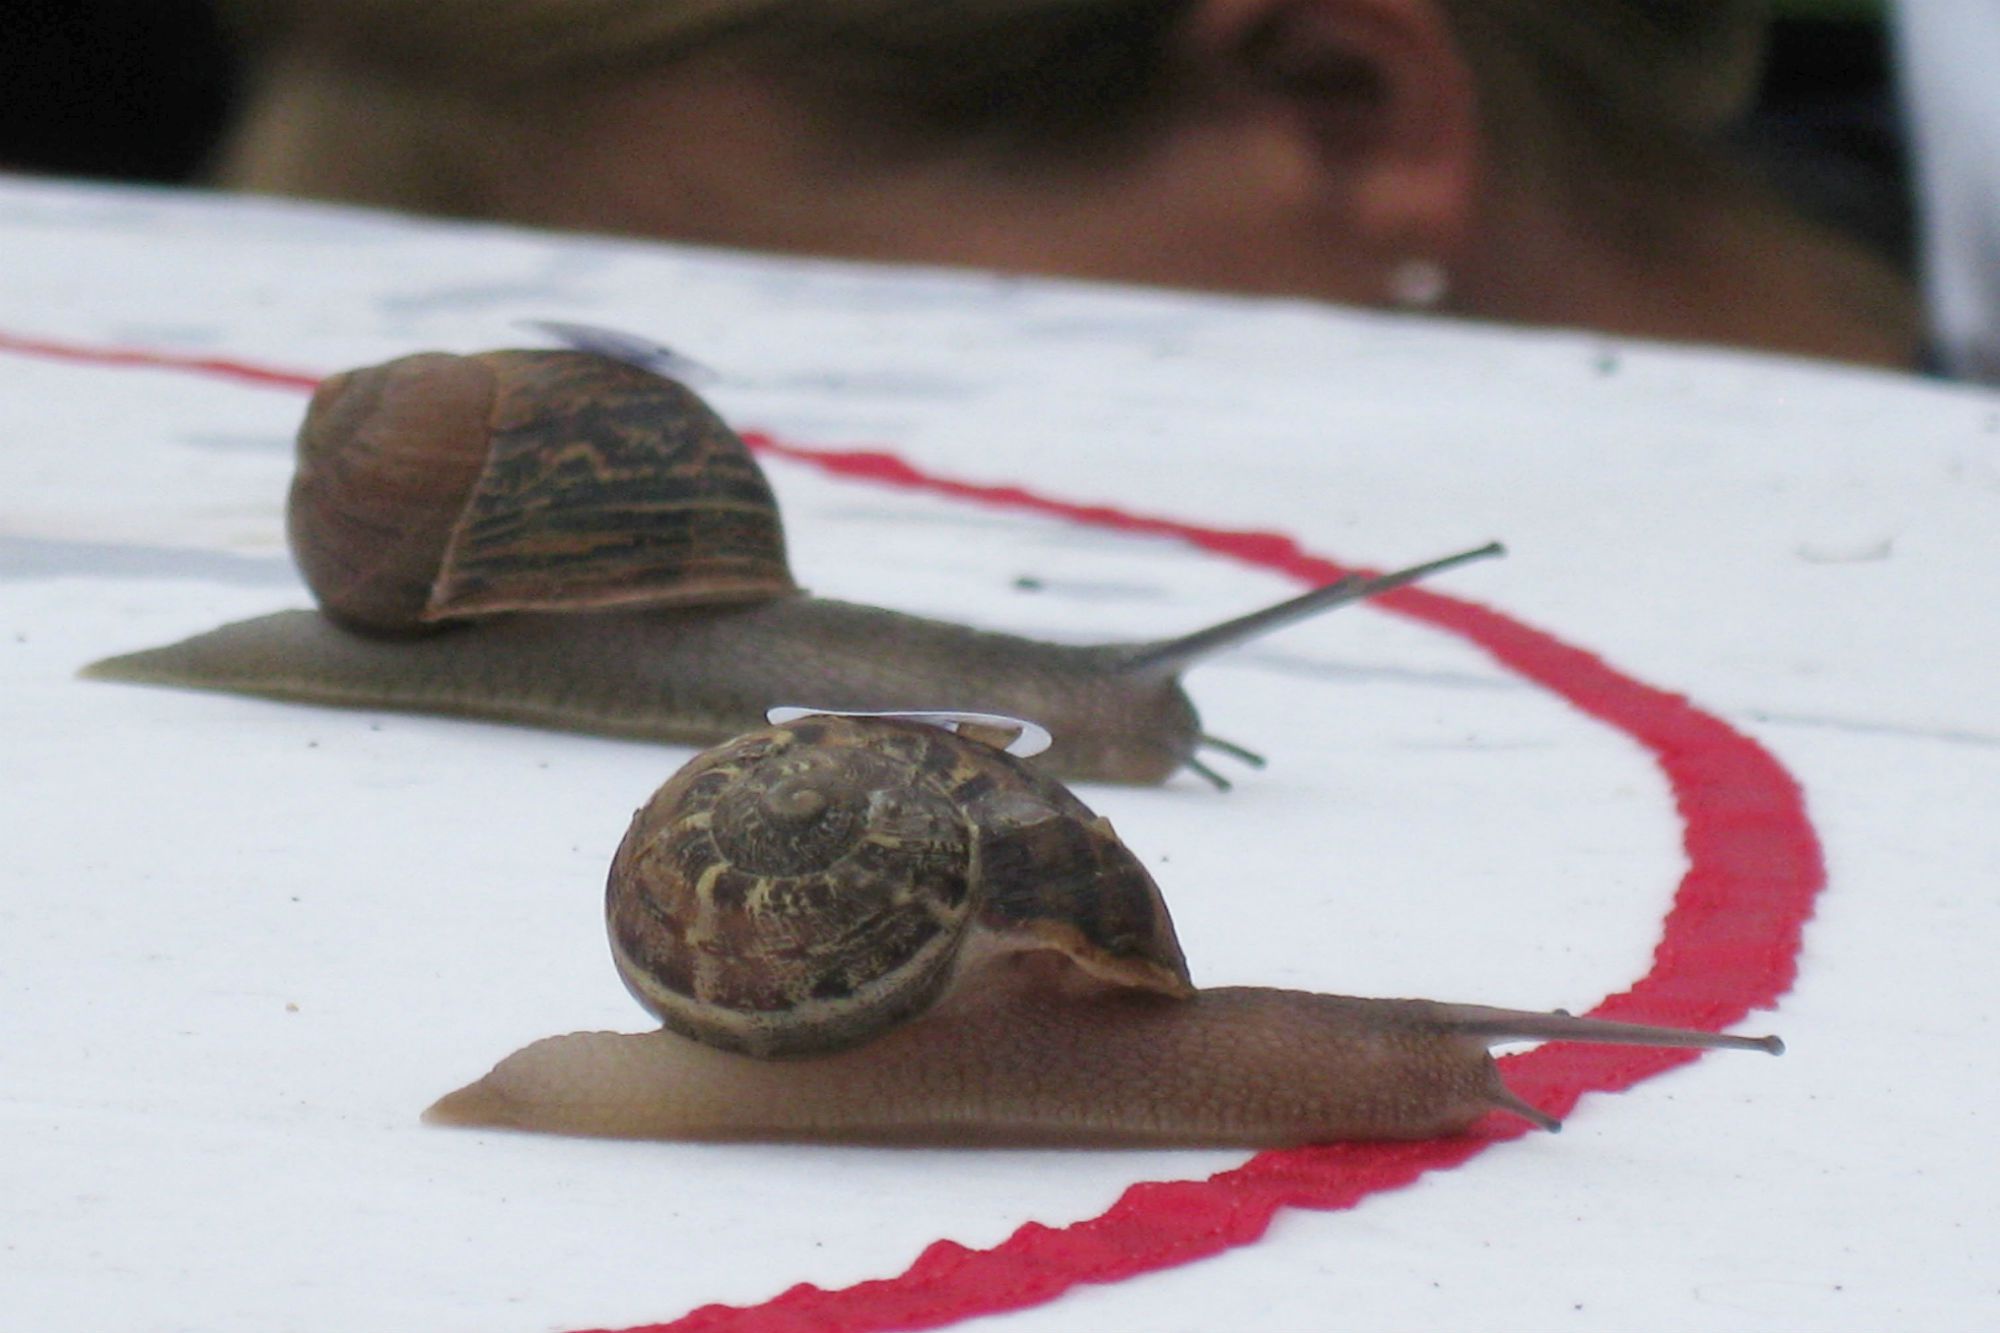 Larry the snail wins World Snail Racing Championships